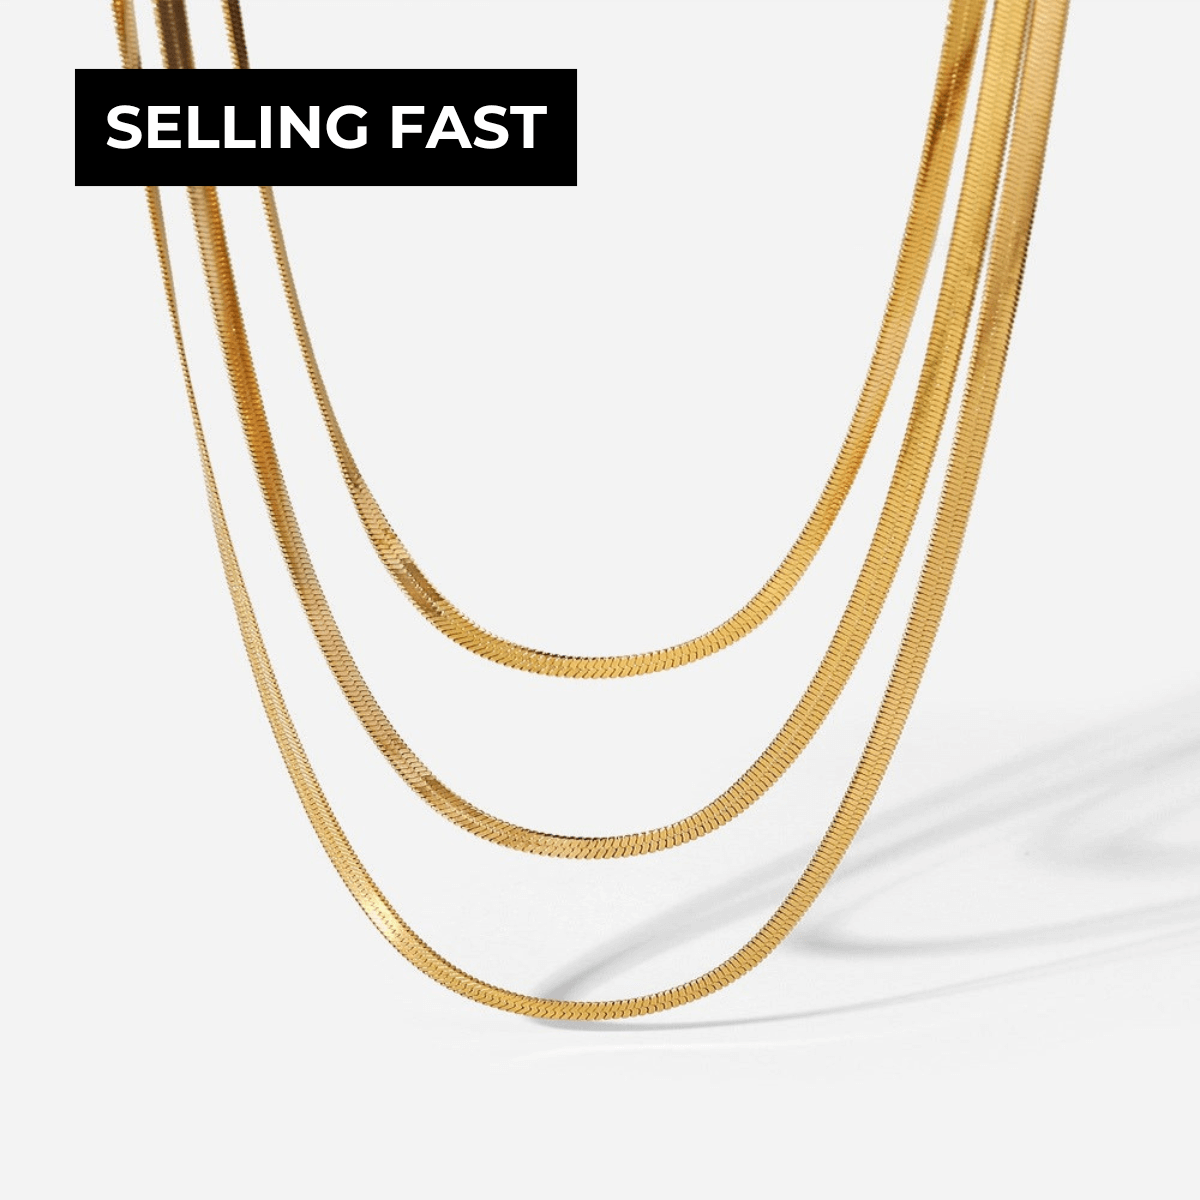 1# BEST Gold Layered Layering Chain Necklace Gift for Women | #1 Best Most Top Trendy Trending Aesthetic Yellow Gold Triple-Layered Snake Layering Chain Necklace Jewelry Gift for Women,Mother,Wife | Mason & Madison Co.